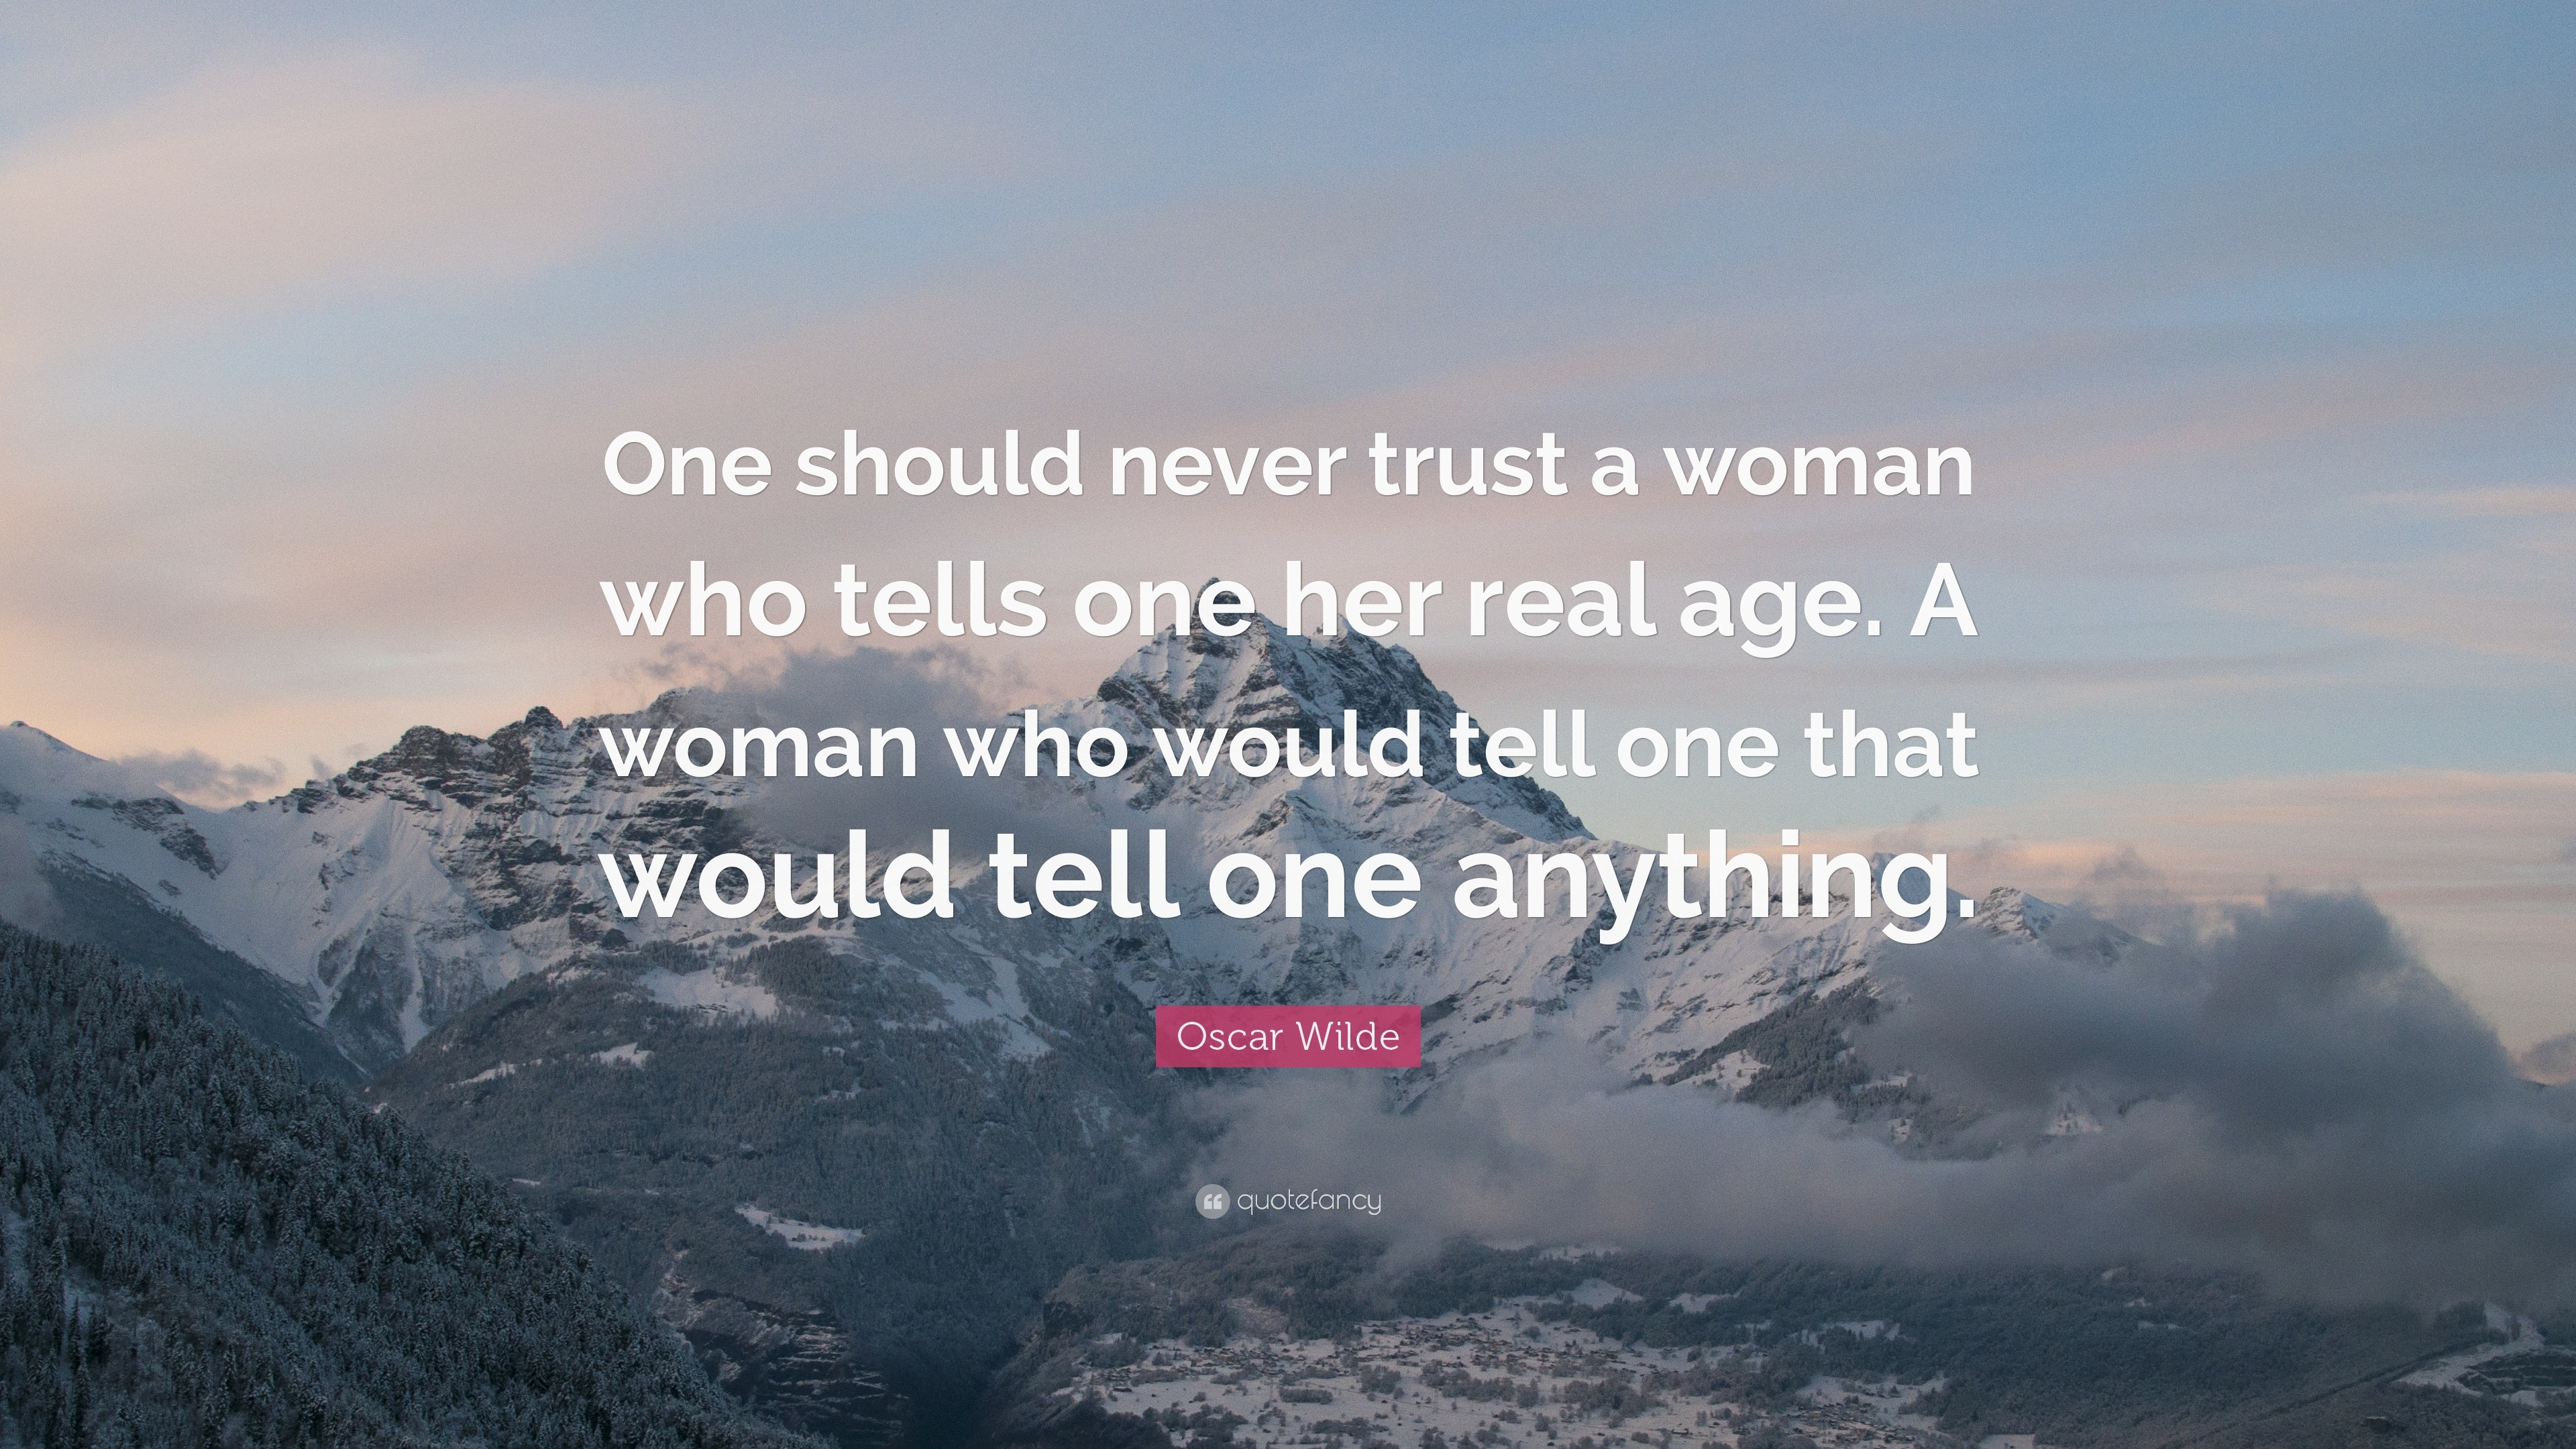 Oscar Wilde Quote: “One should never trust a woman who tells one her ...